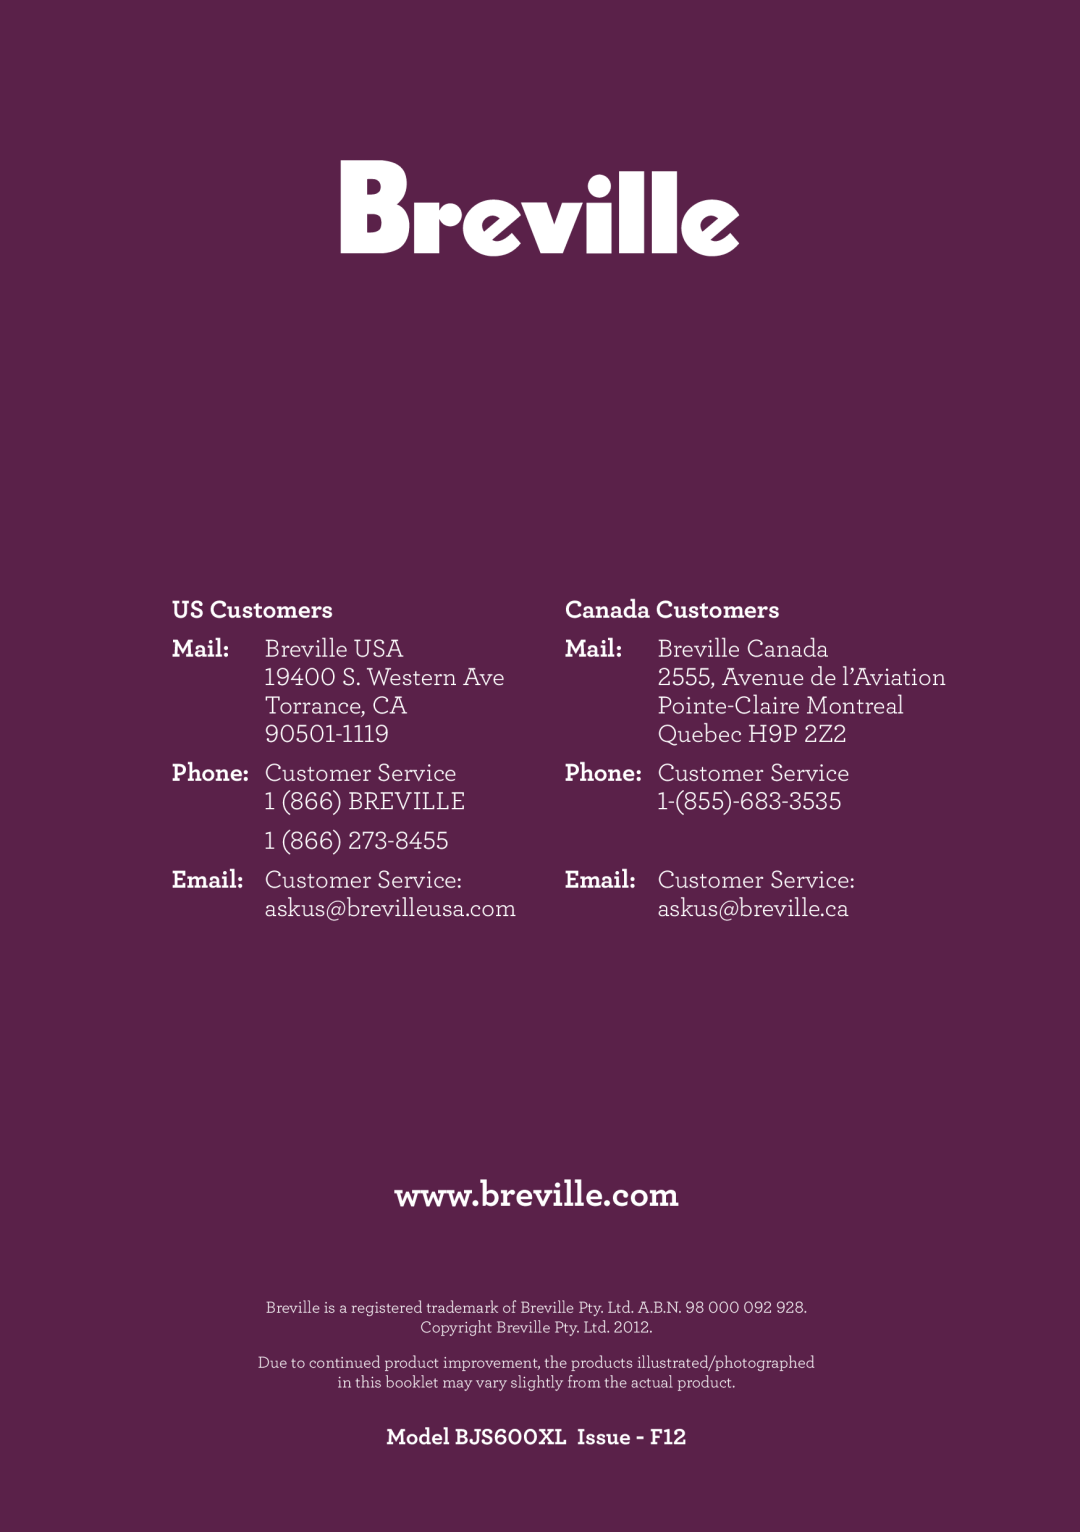 Breville BJS600XL manual US Customers, Canada Customers, Mail, Email 